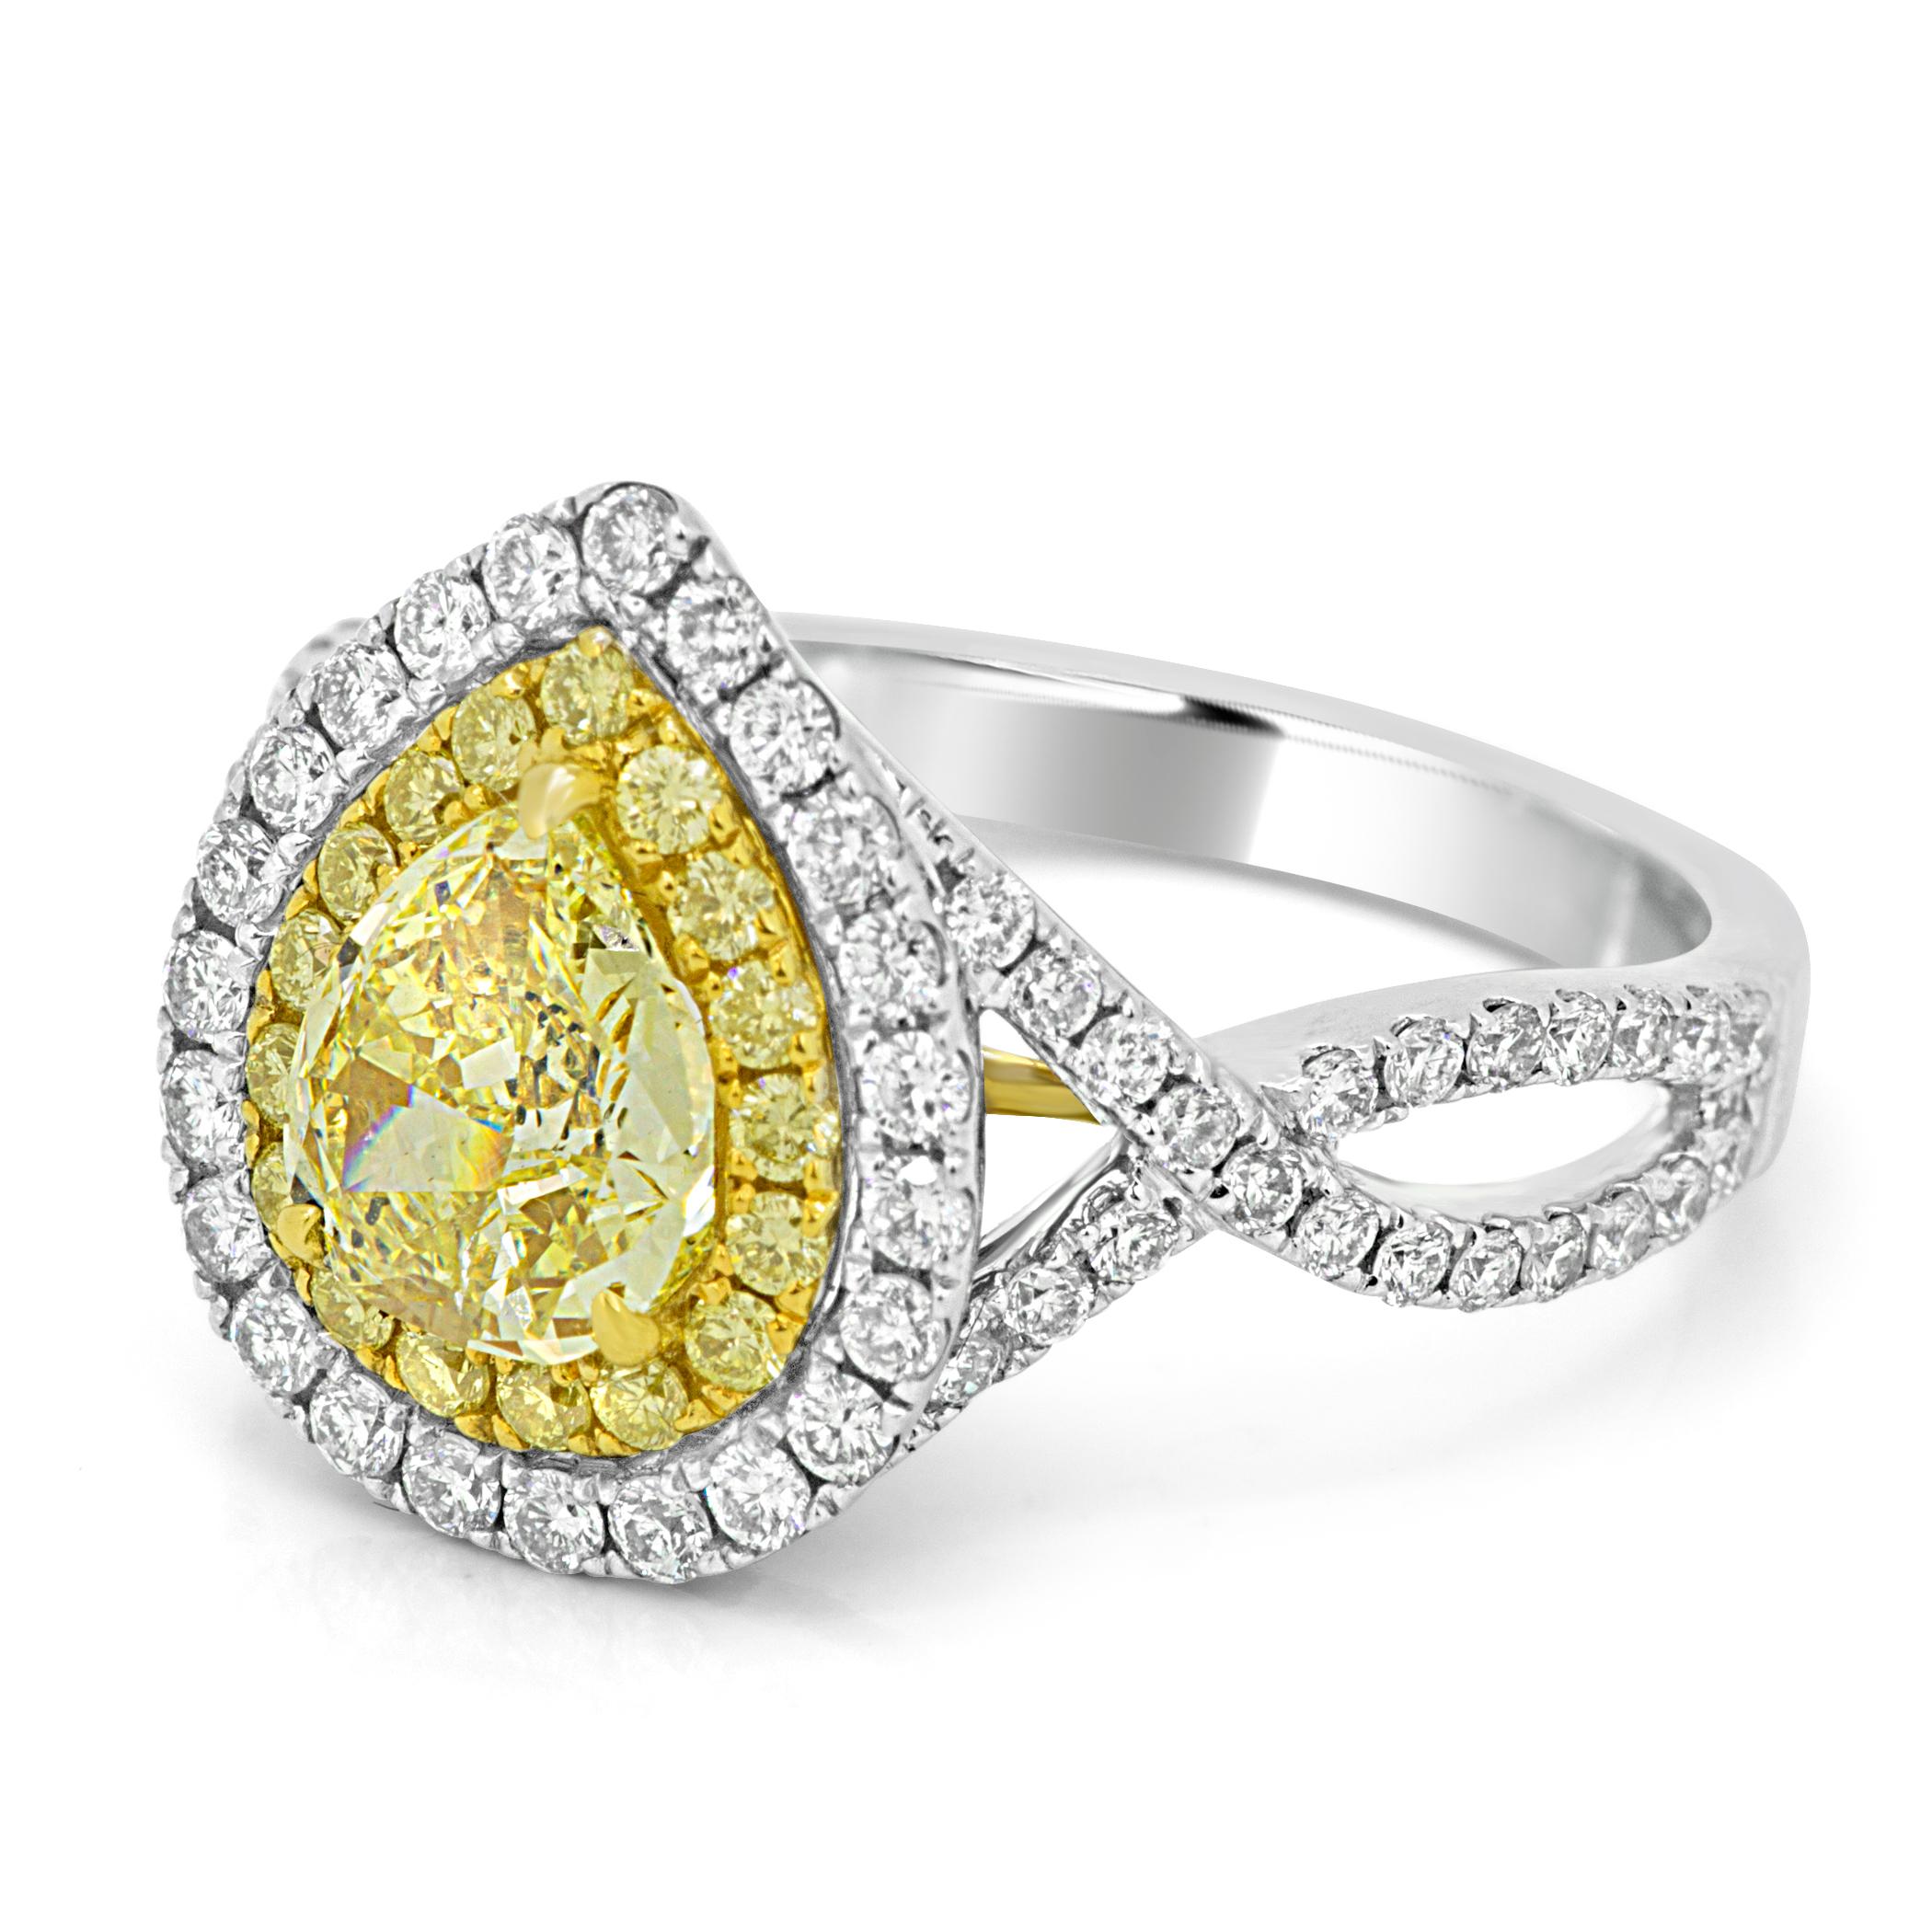 EGL USA Certified Natural Fancy yellow Diamond Pear 1.05 Carat Encircled in Double Halo of Natural Fancy Yellow Round Diamonds 0.22 Carat and White Round Diamonds 0.75 Carat in Stunning and Classic 18K White and Yellow Gold Bridal Or Fashion